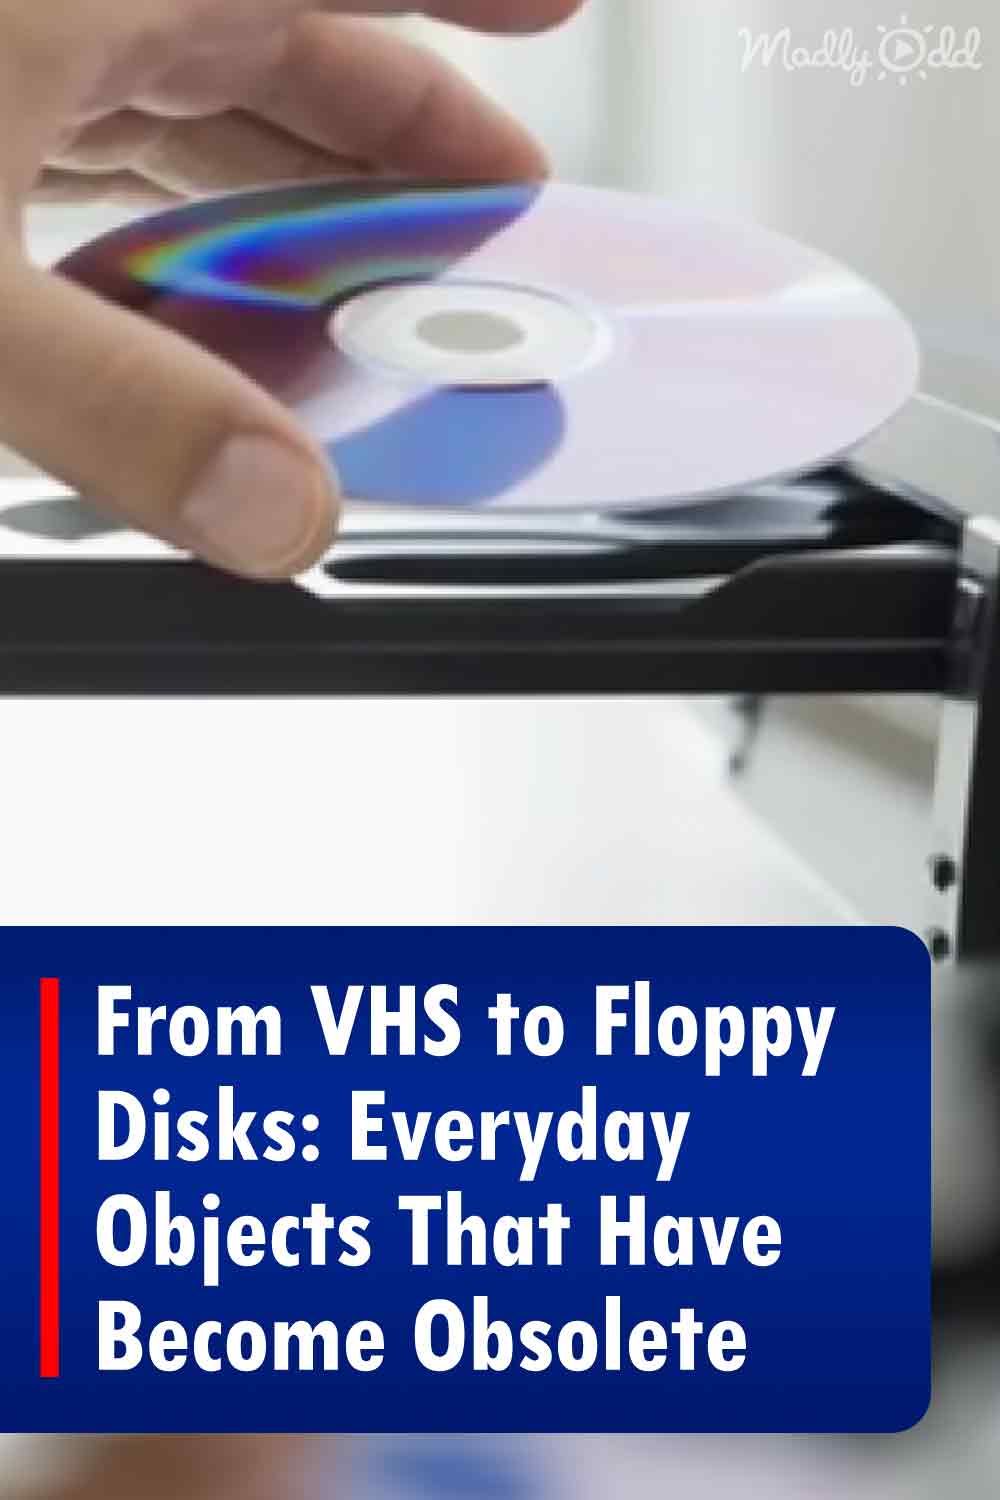 From VHS to Floppy Disks: Everyday Objects That Have Become Obsolete